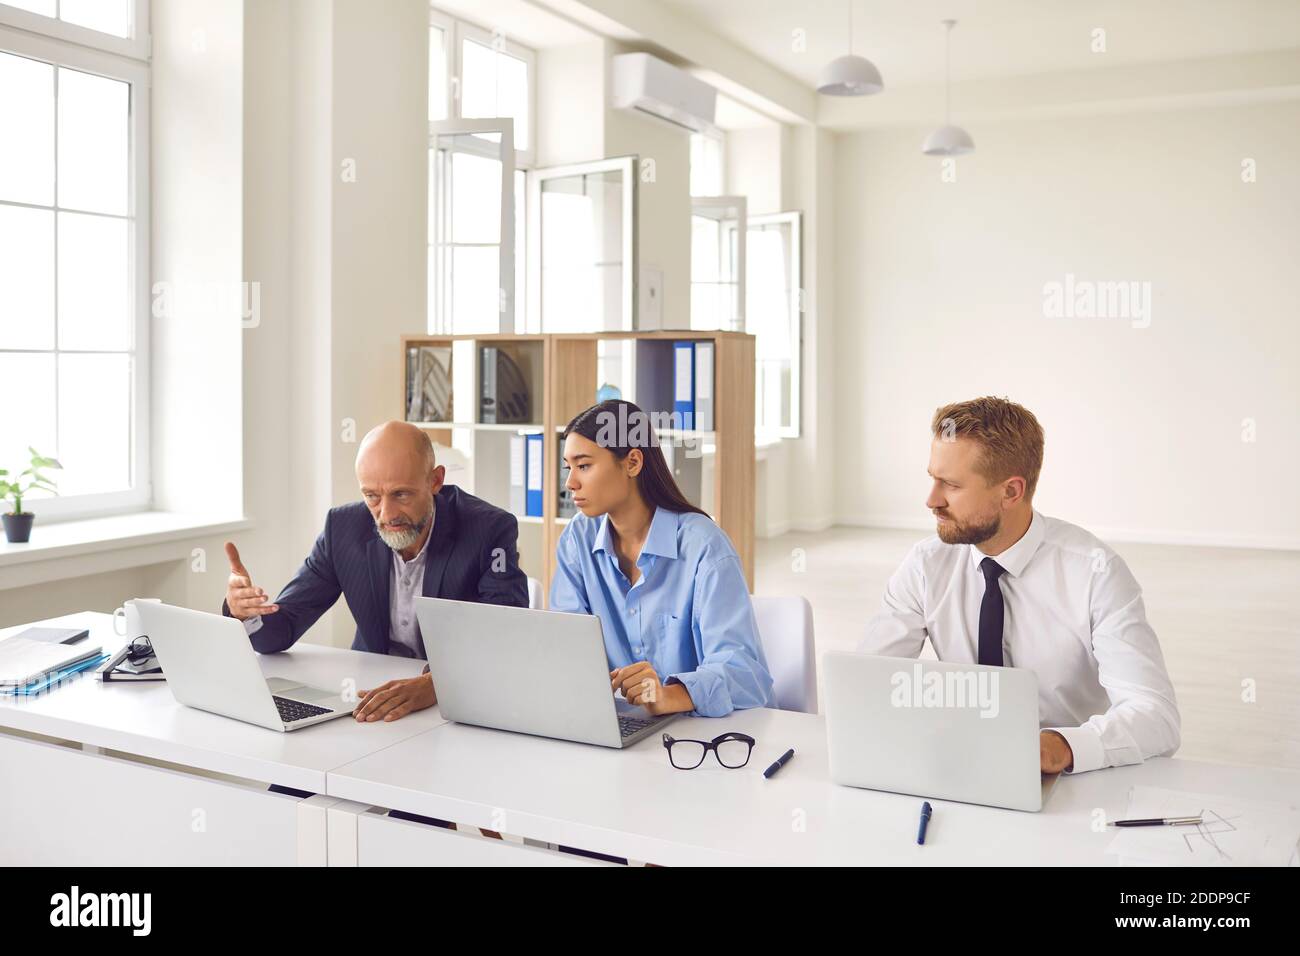 Serious mature company manager and young trainee employees working on laptops together Stock Photo